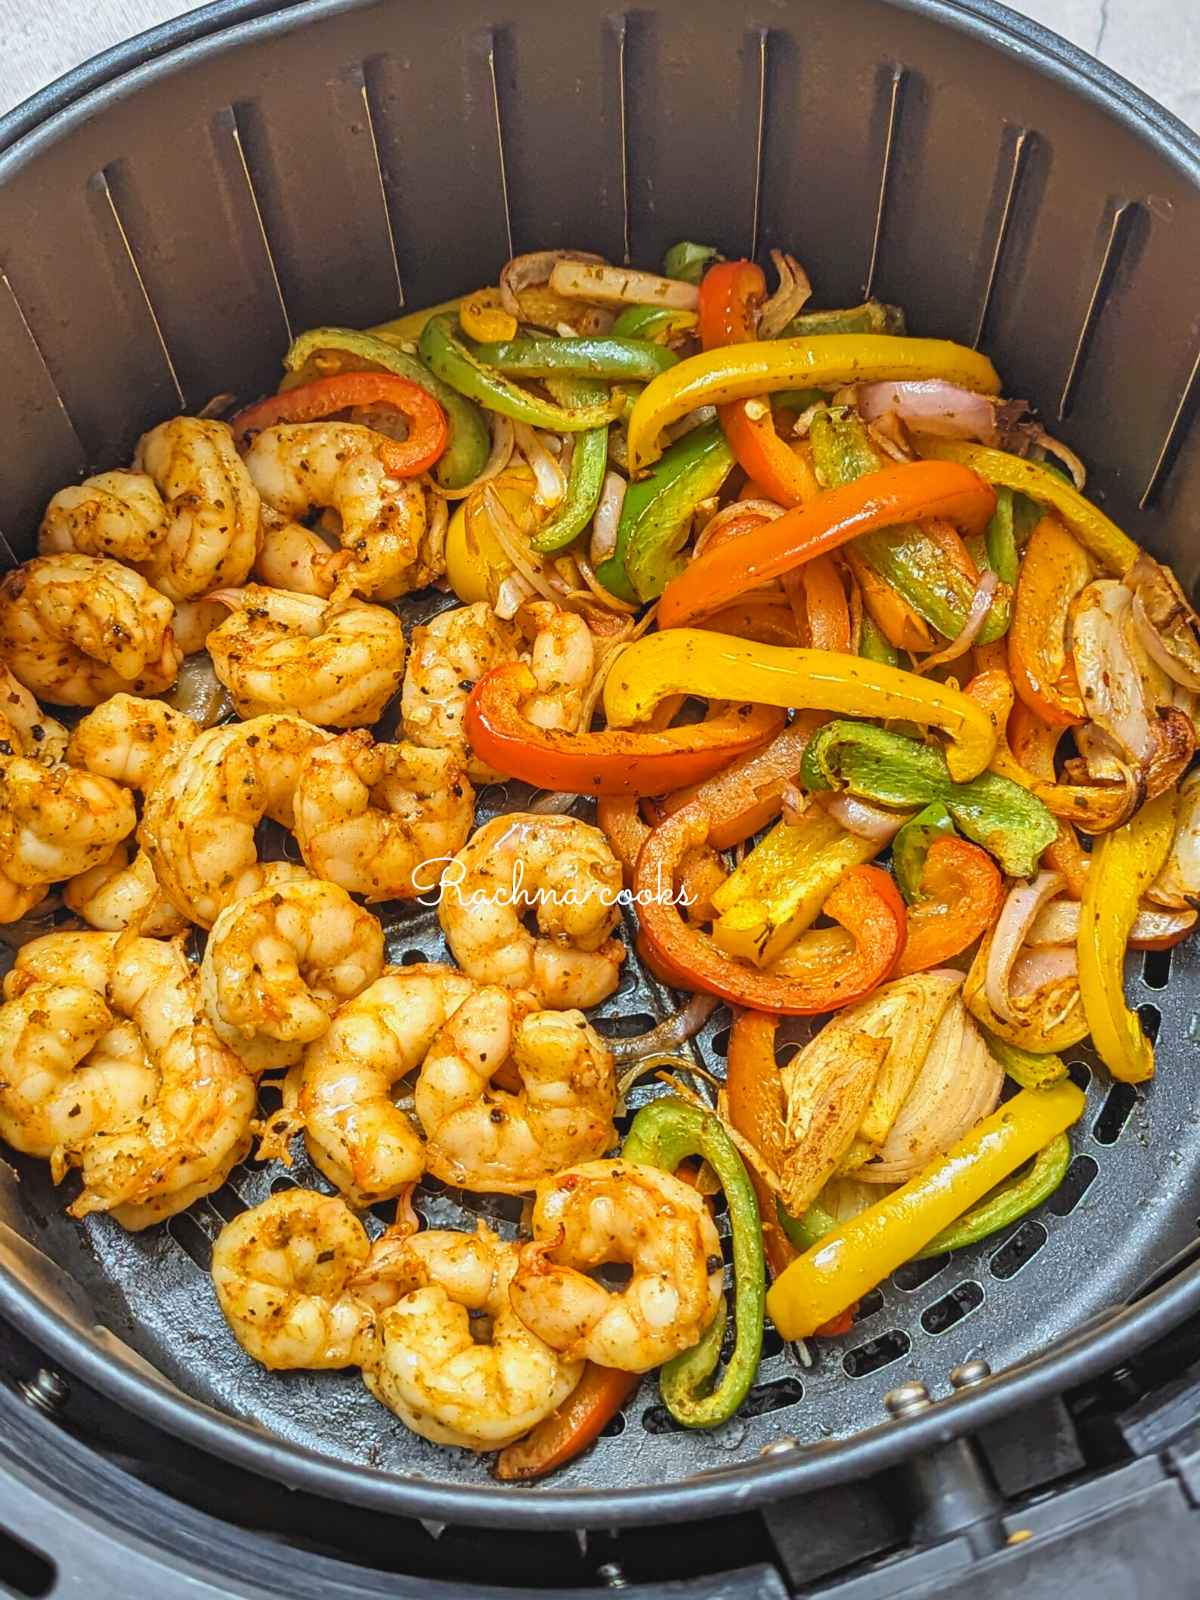 Cooked shrimp and veggies in air fryer basket